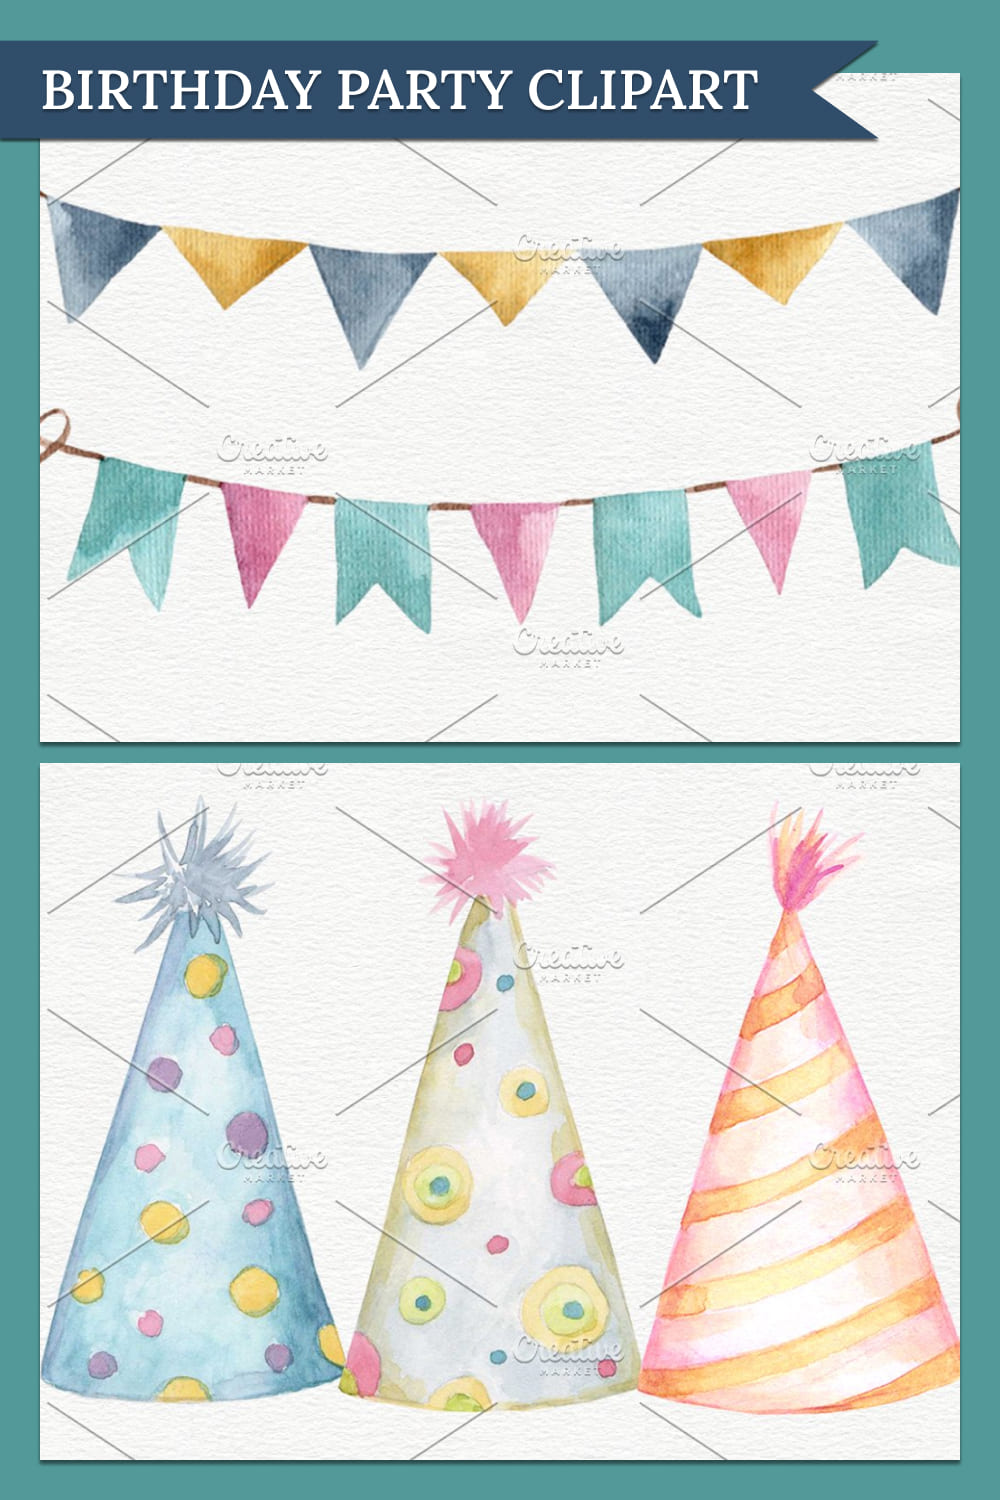 A selection of wonderful watercolor images with birthday banners and hats.